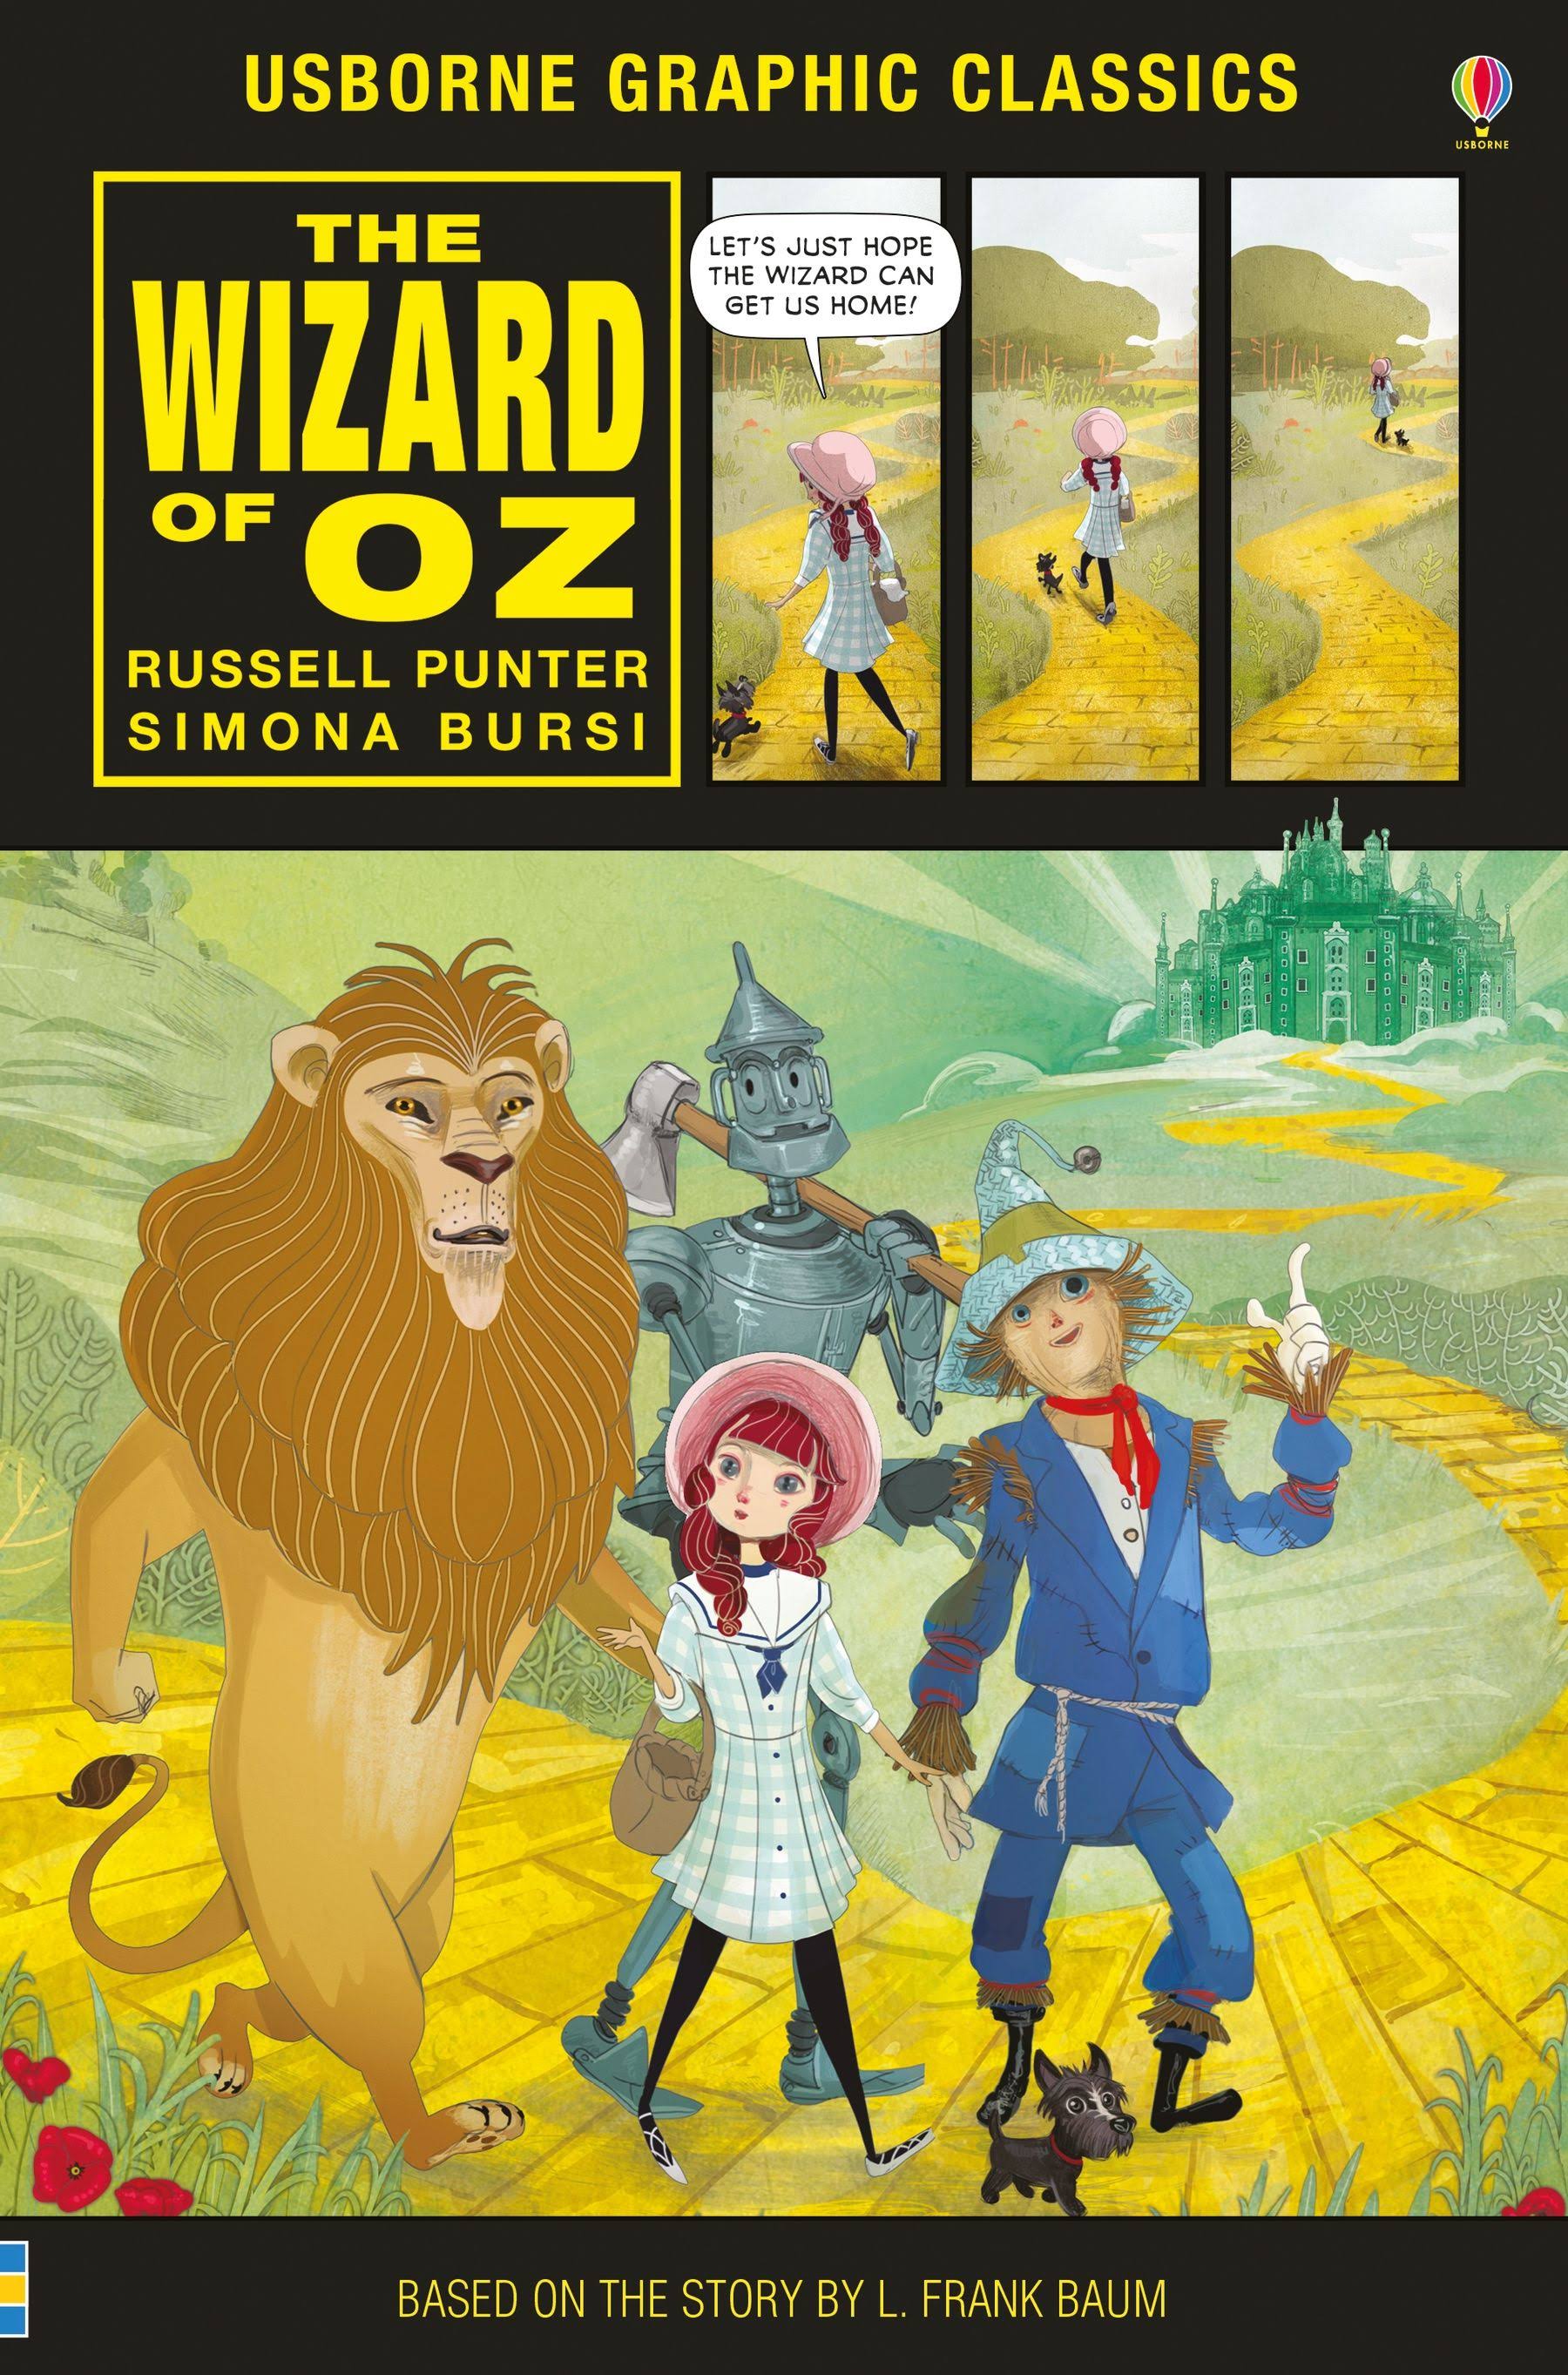 The Wizard of Oz [Book]